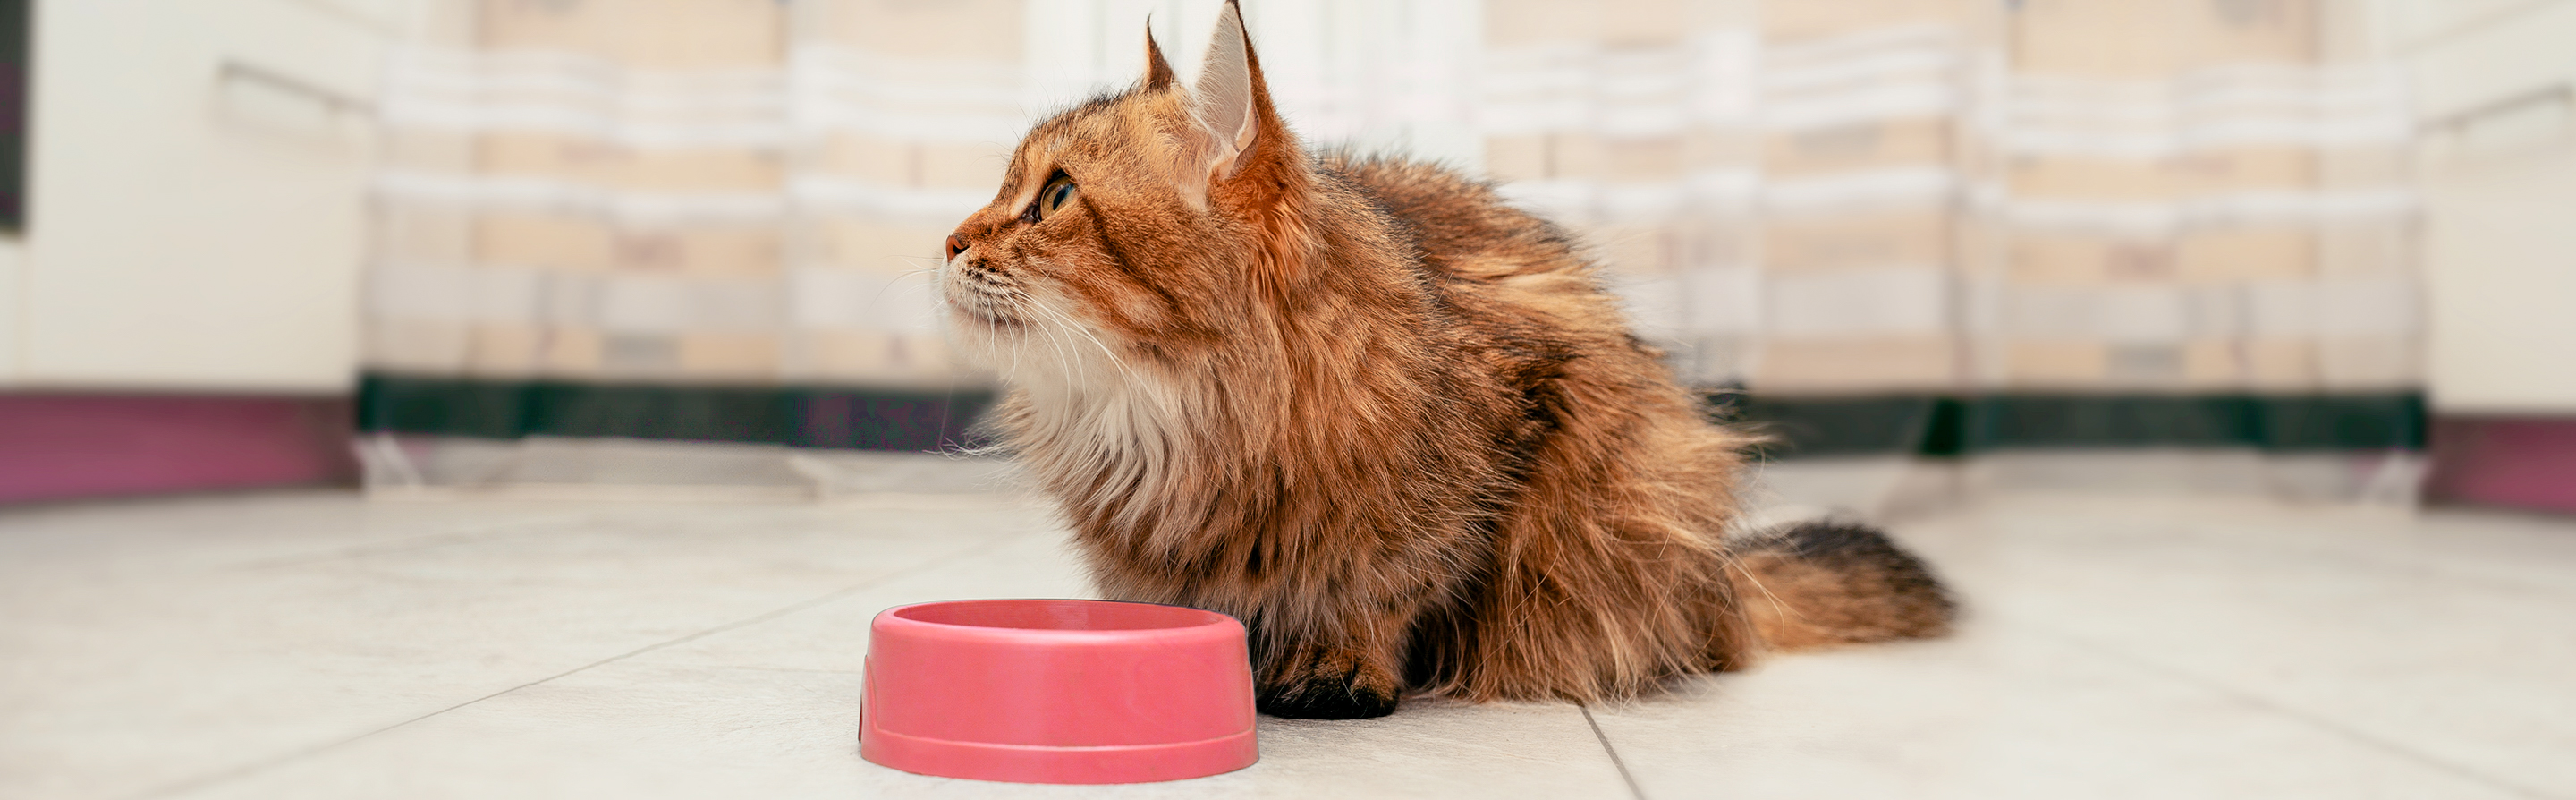 Norwegian Forest Cat sitting in a kitchen eating from a feeding bowl